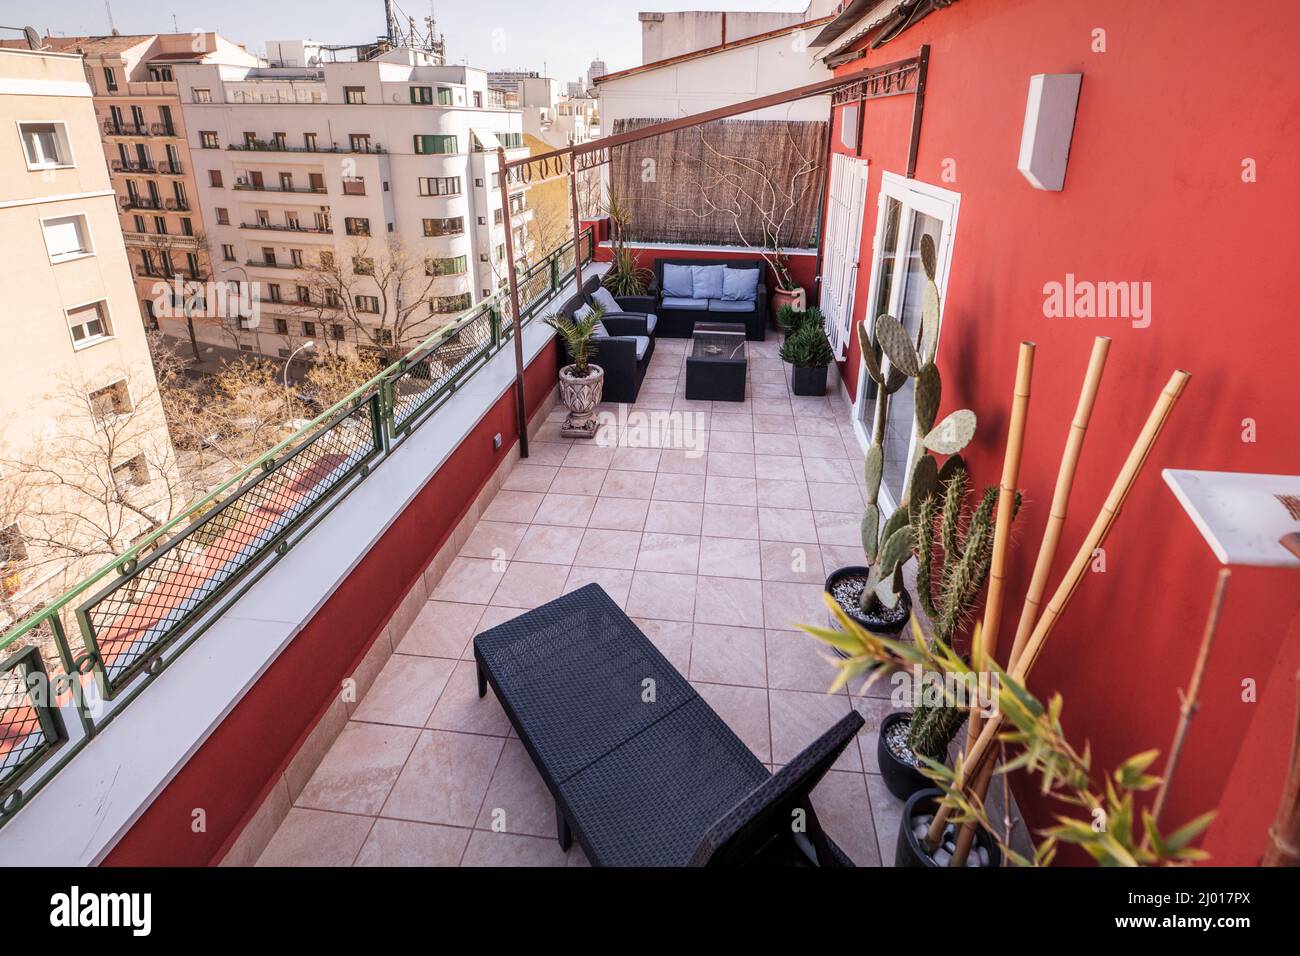 Views of a terrace with rattan furniture, plants and red painted walls Stock Photo